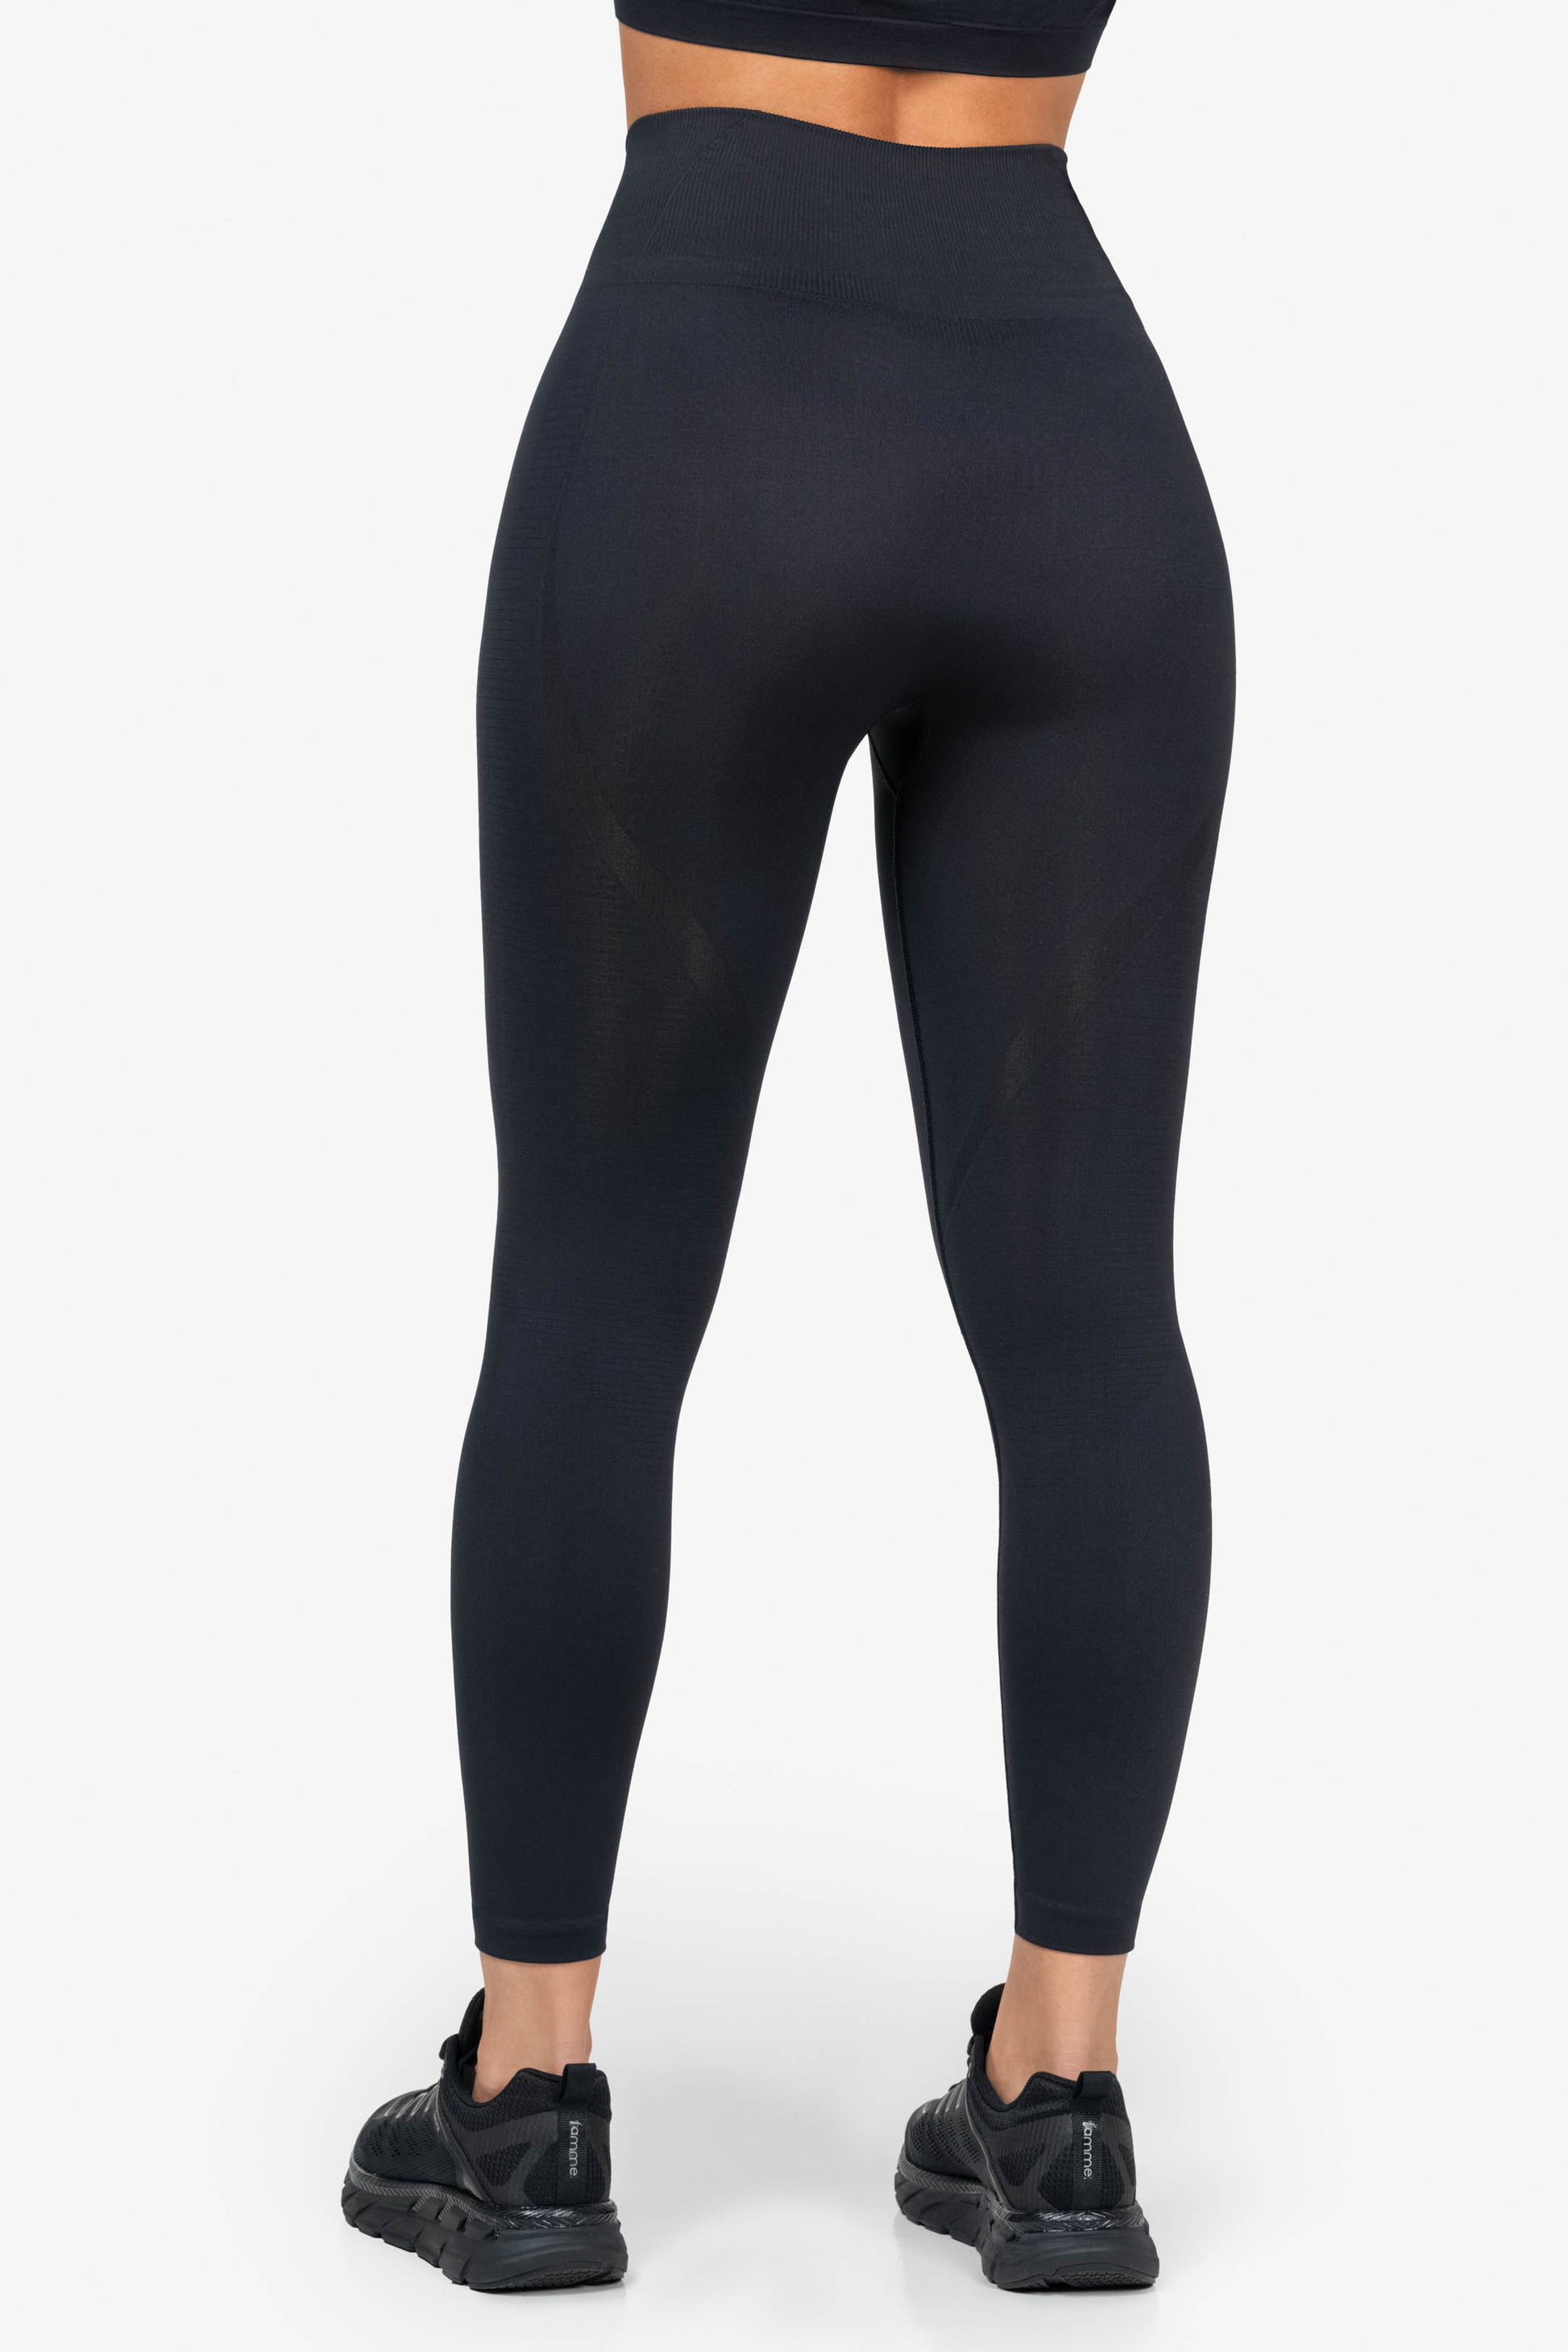 Gymshark Ultra Seamless Leggings, Bright Workout Leggings Worth Adding to  Your Spring Shopping List